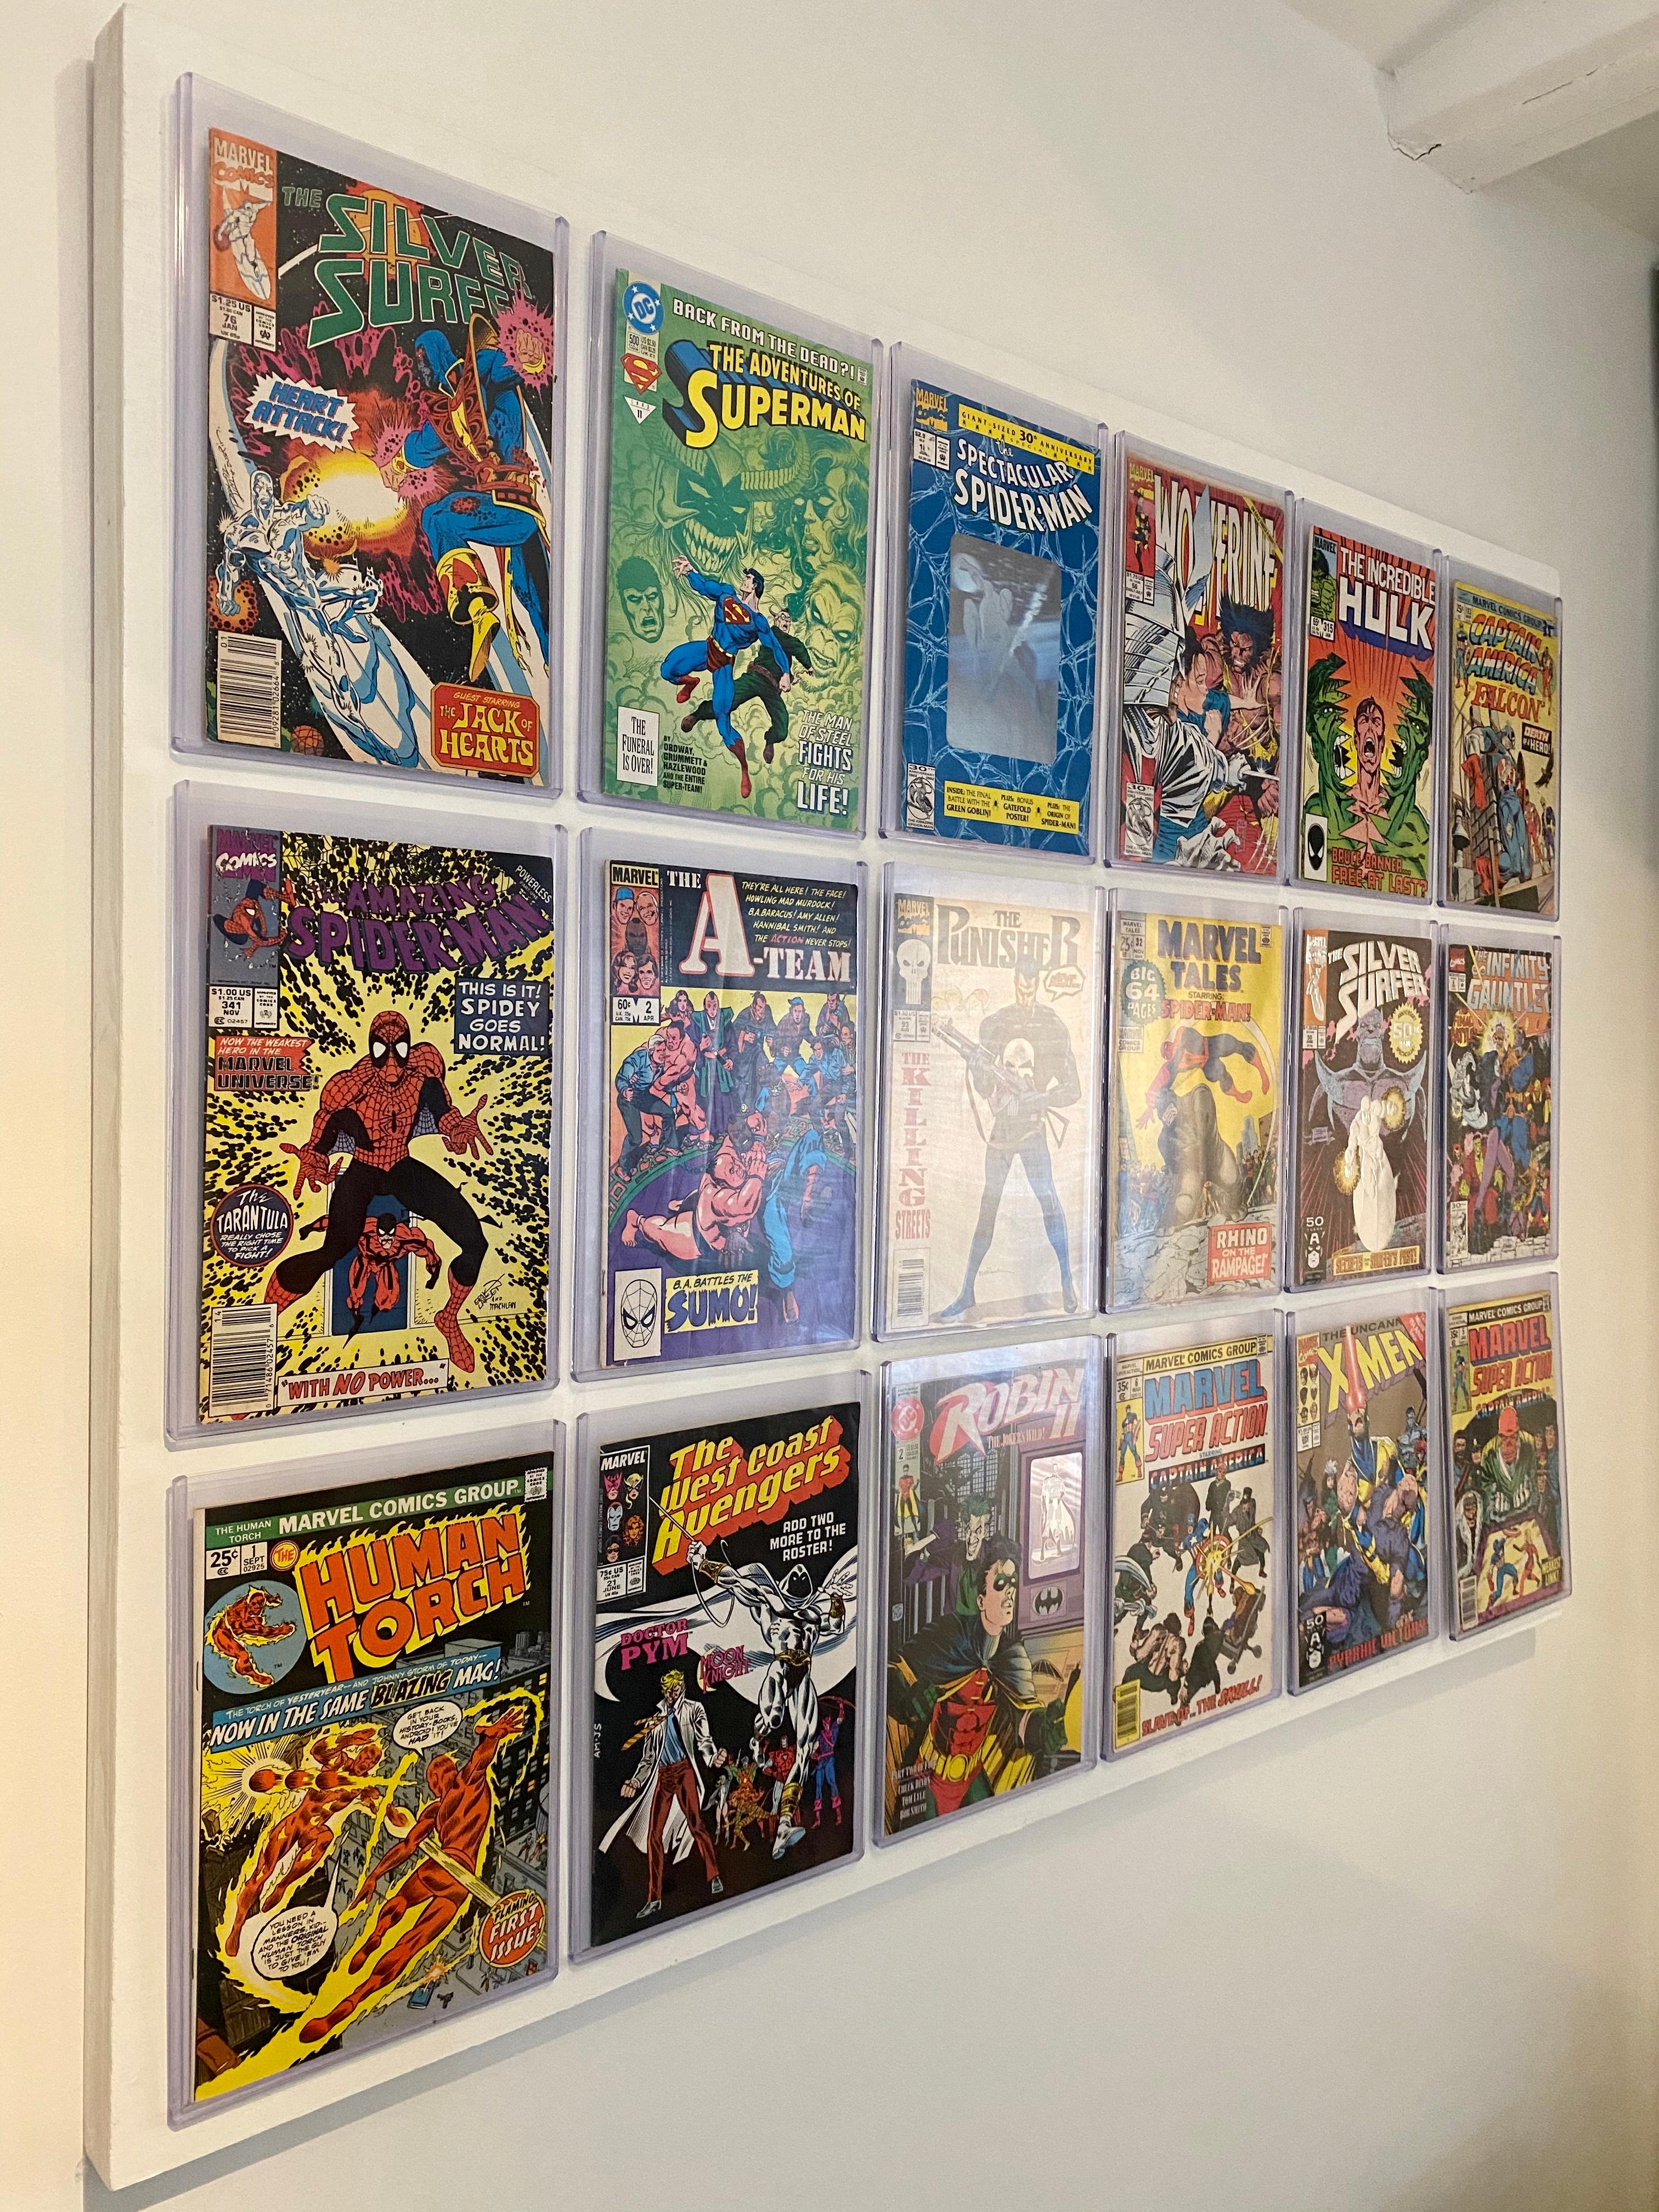 These Interactive art pieces are part of a series of 6 pieces, each one being one of a kind. Much like the card collecting of our youth, the composition and comics themselves will be kept secret until you receive them. The comics are a mixture of